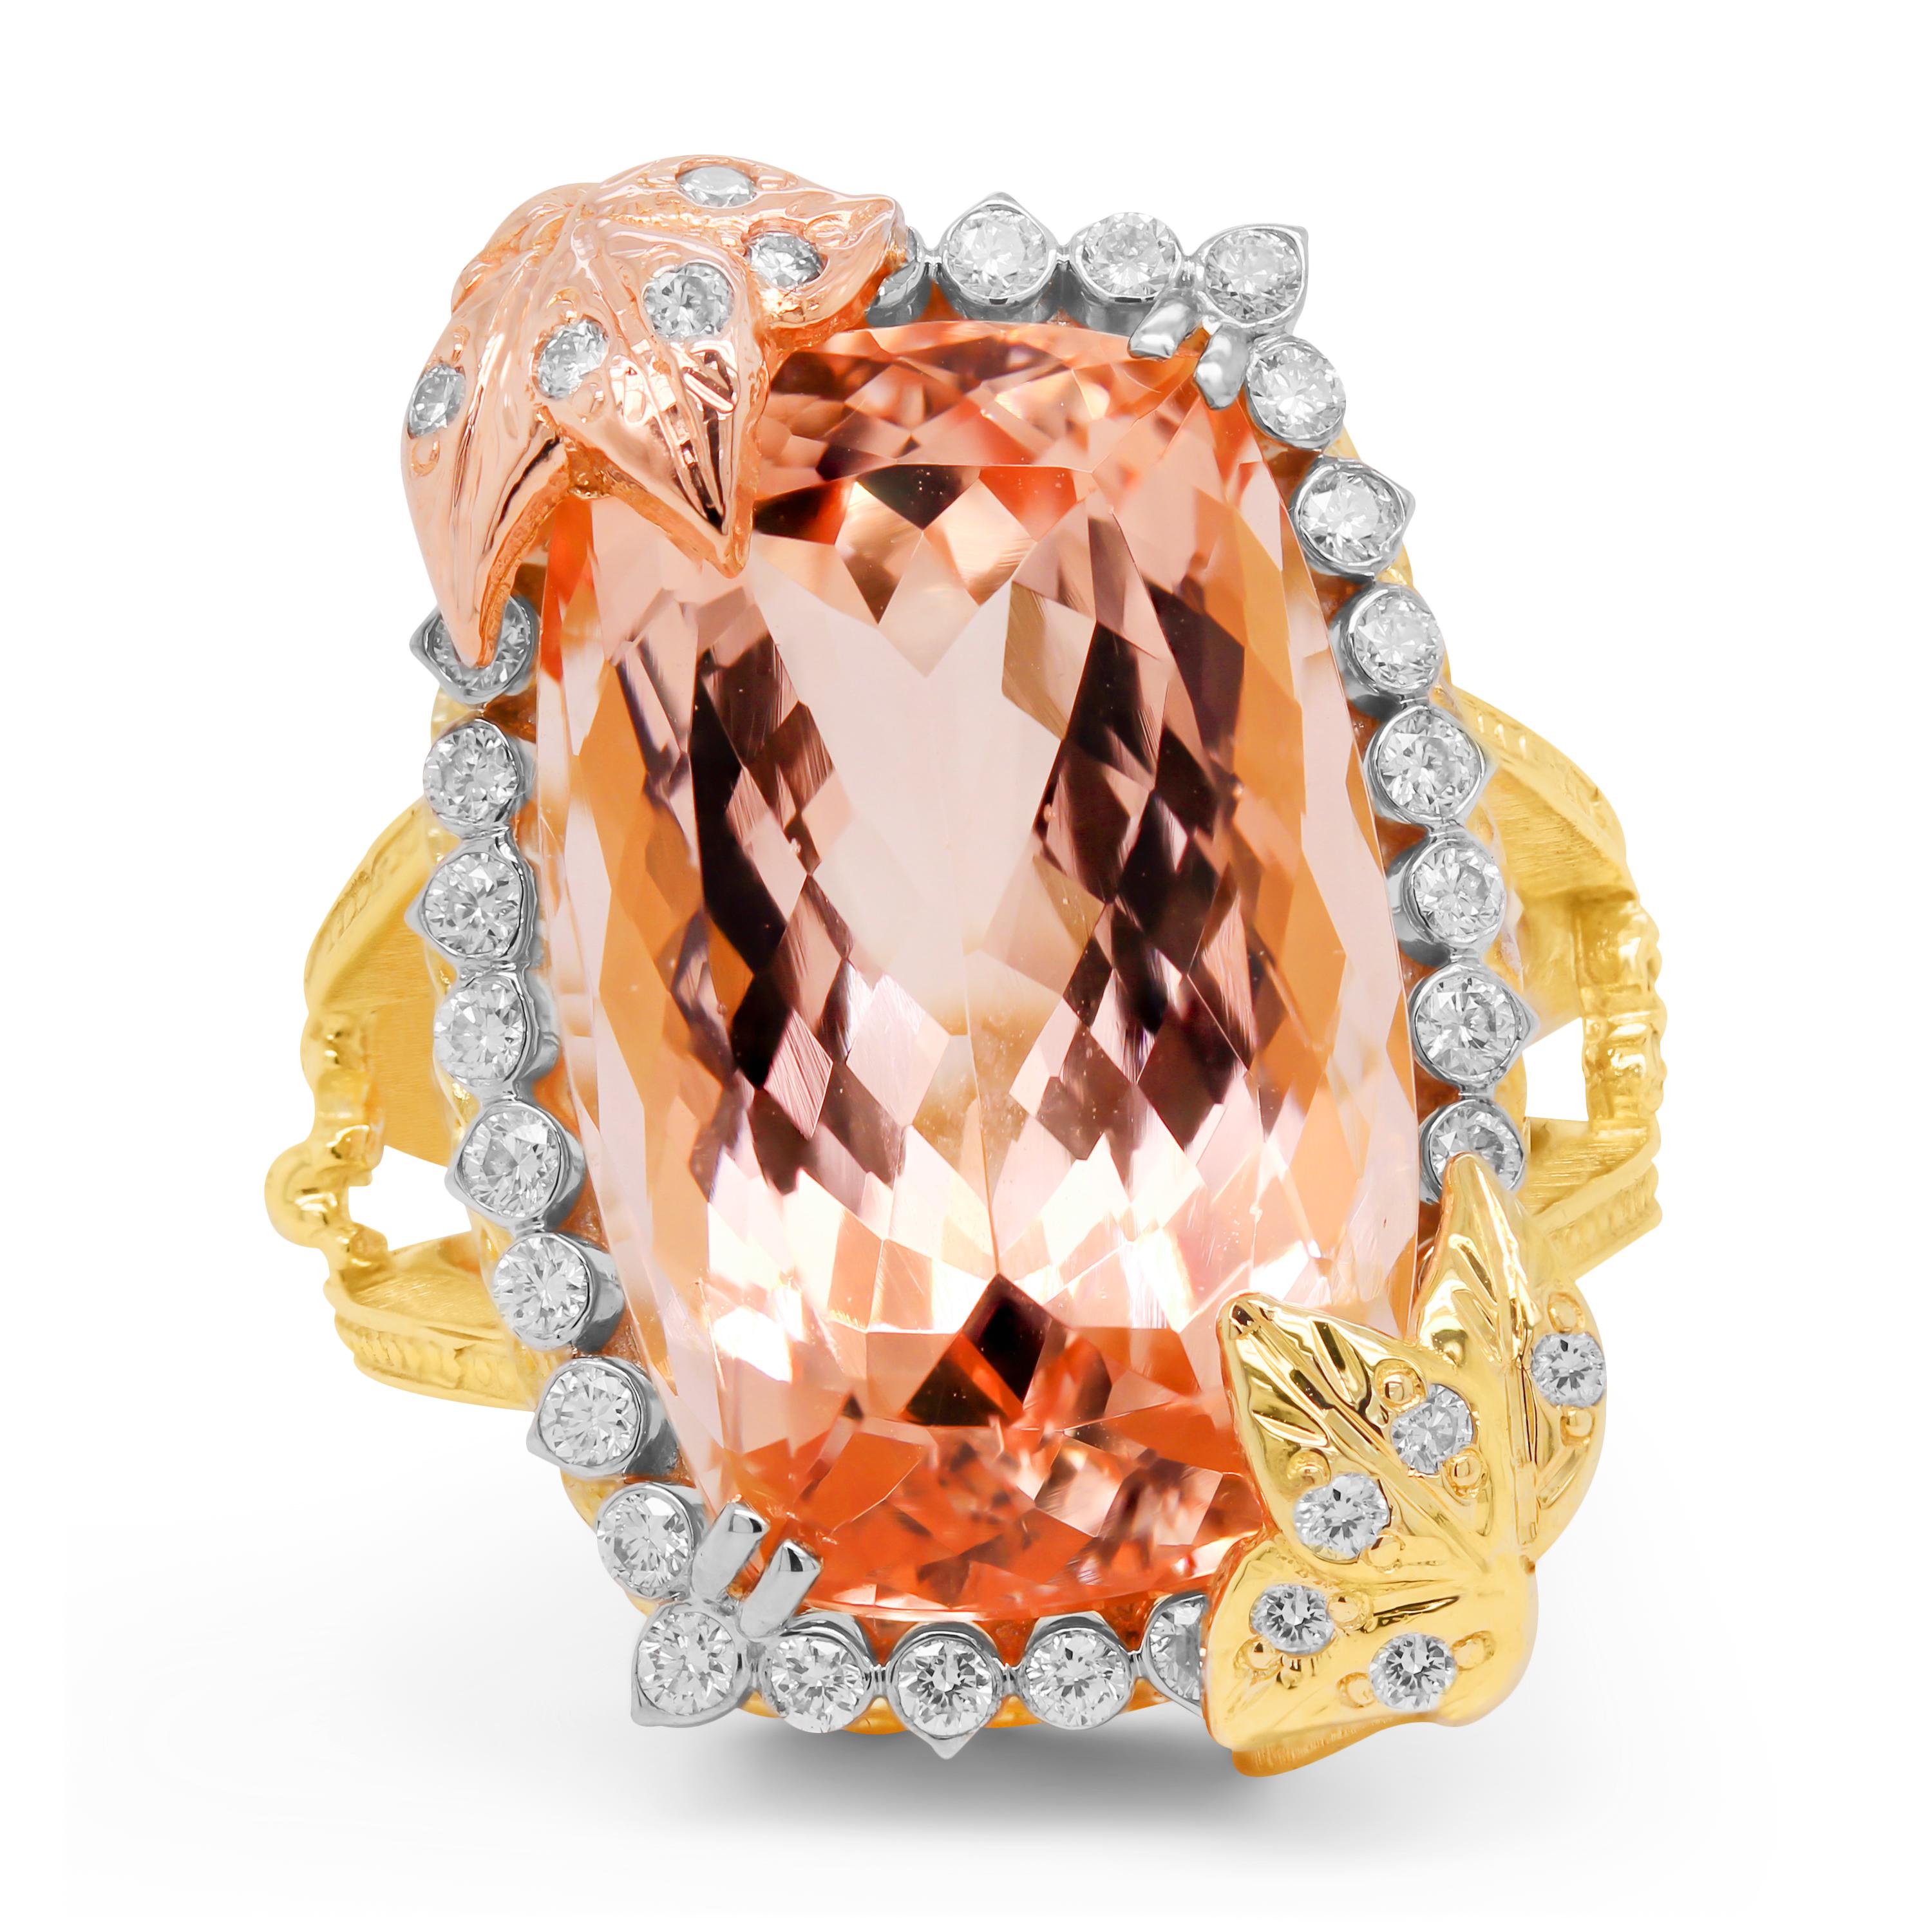 Stambolian 18K Tri Color Gold Diamond Collectors Quality Morganite Cocktail Ring

A one-of-a-kind masterpiece featuring a breathtaking, collectors quality Morganite center with two gold and diamond petals holding the center stone along with a row of